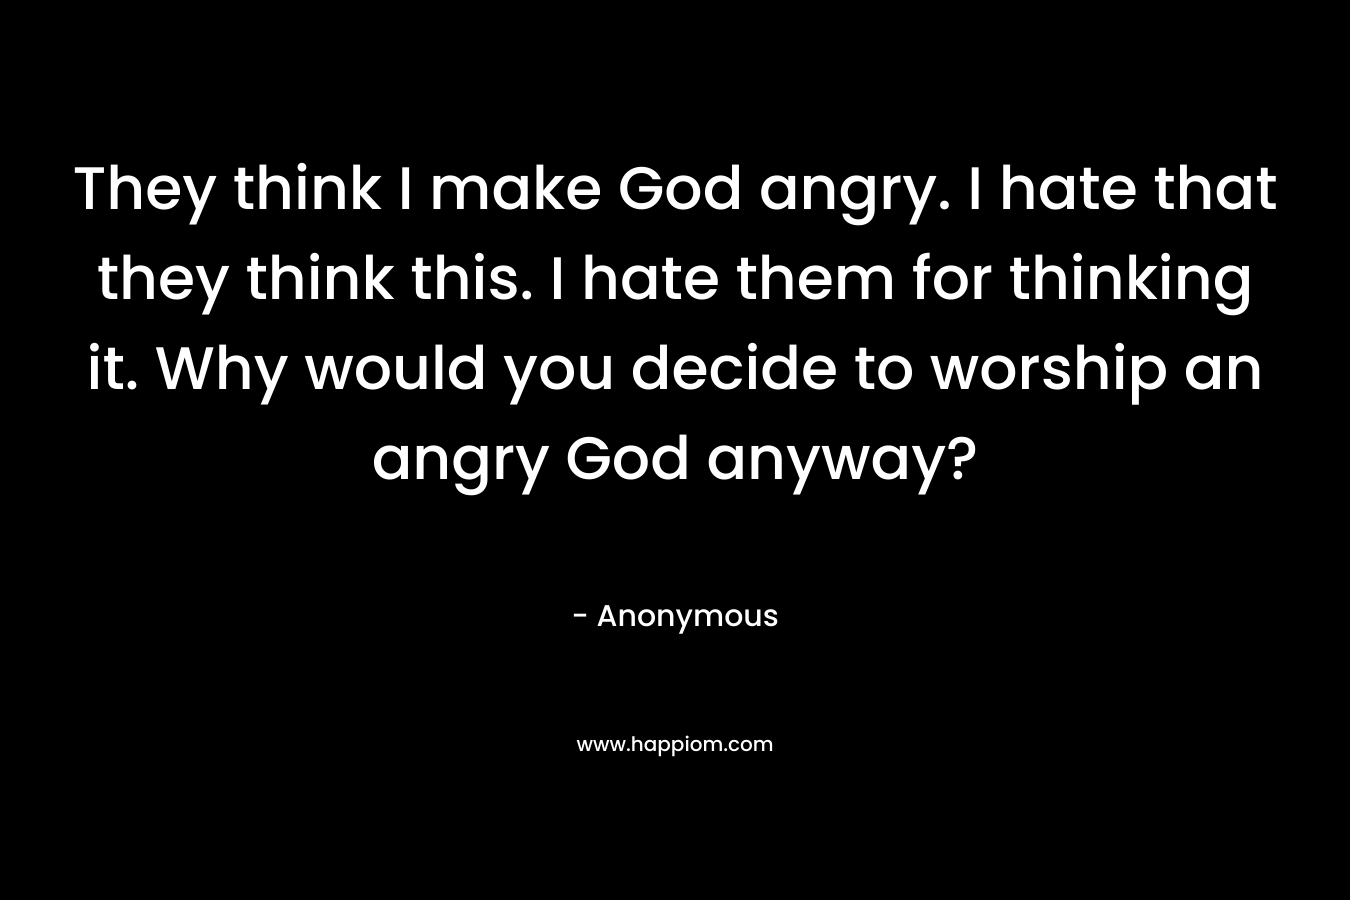 They think I make God angry. I hate that they think this. I hate them for thinking it. Why would you decide to worship an angry God anyway? – Anonymous